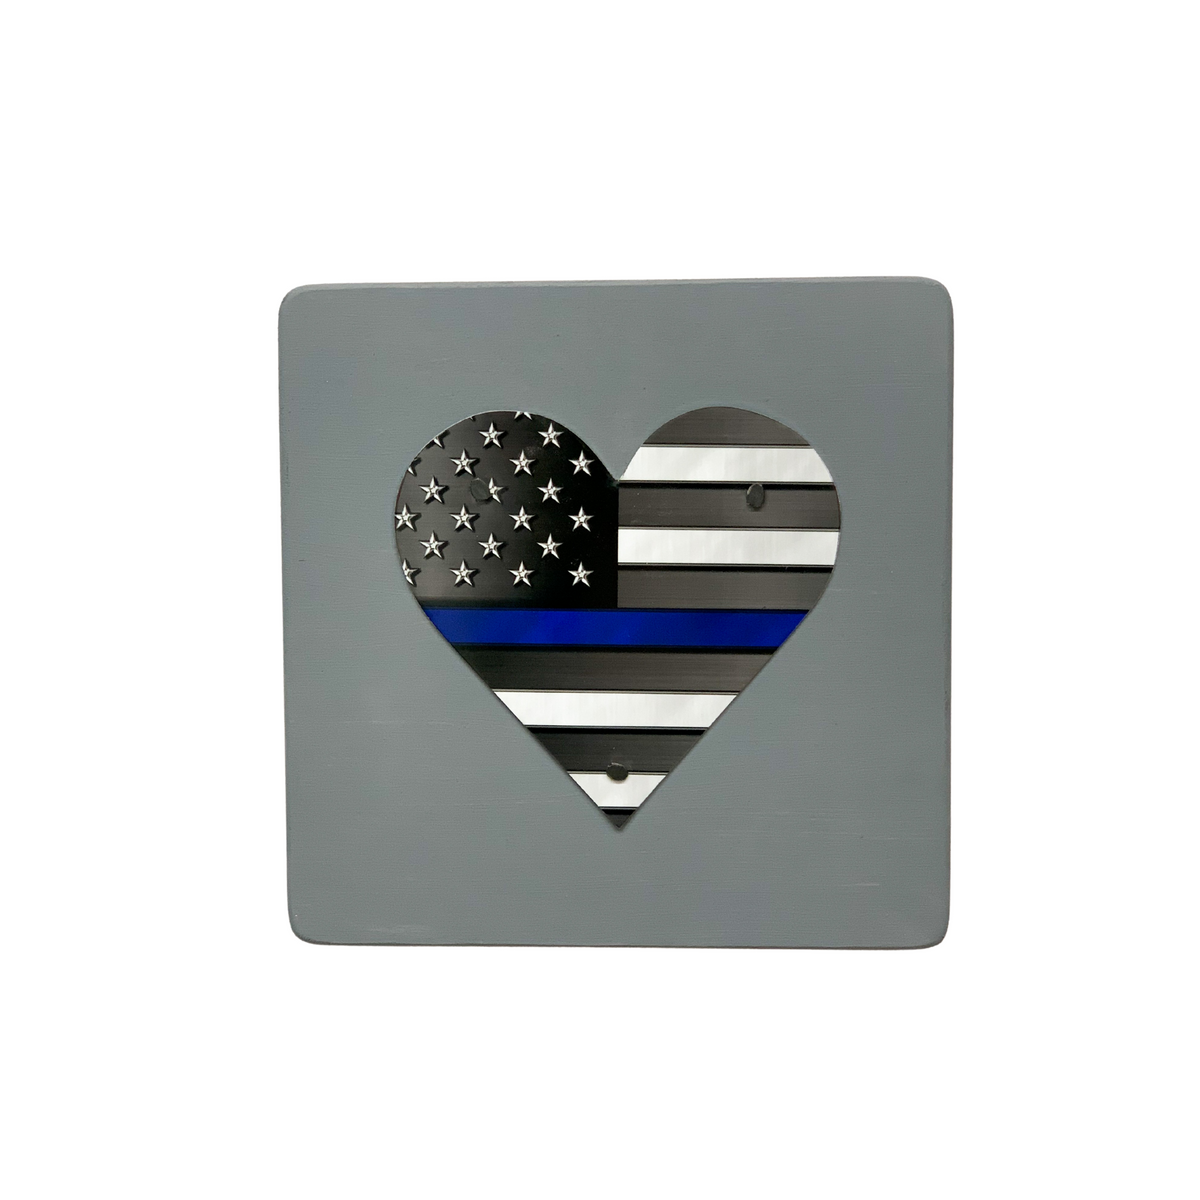 Thin Line Heart - BLUE LINE, RED LINE, OR GREEN LINE